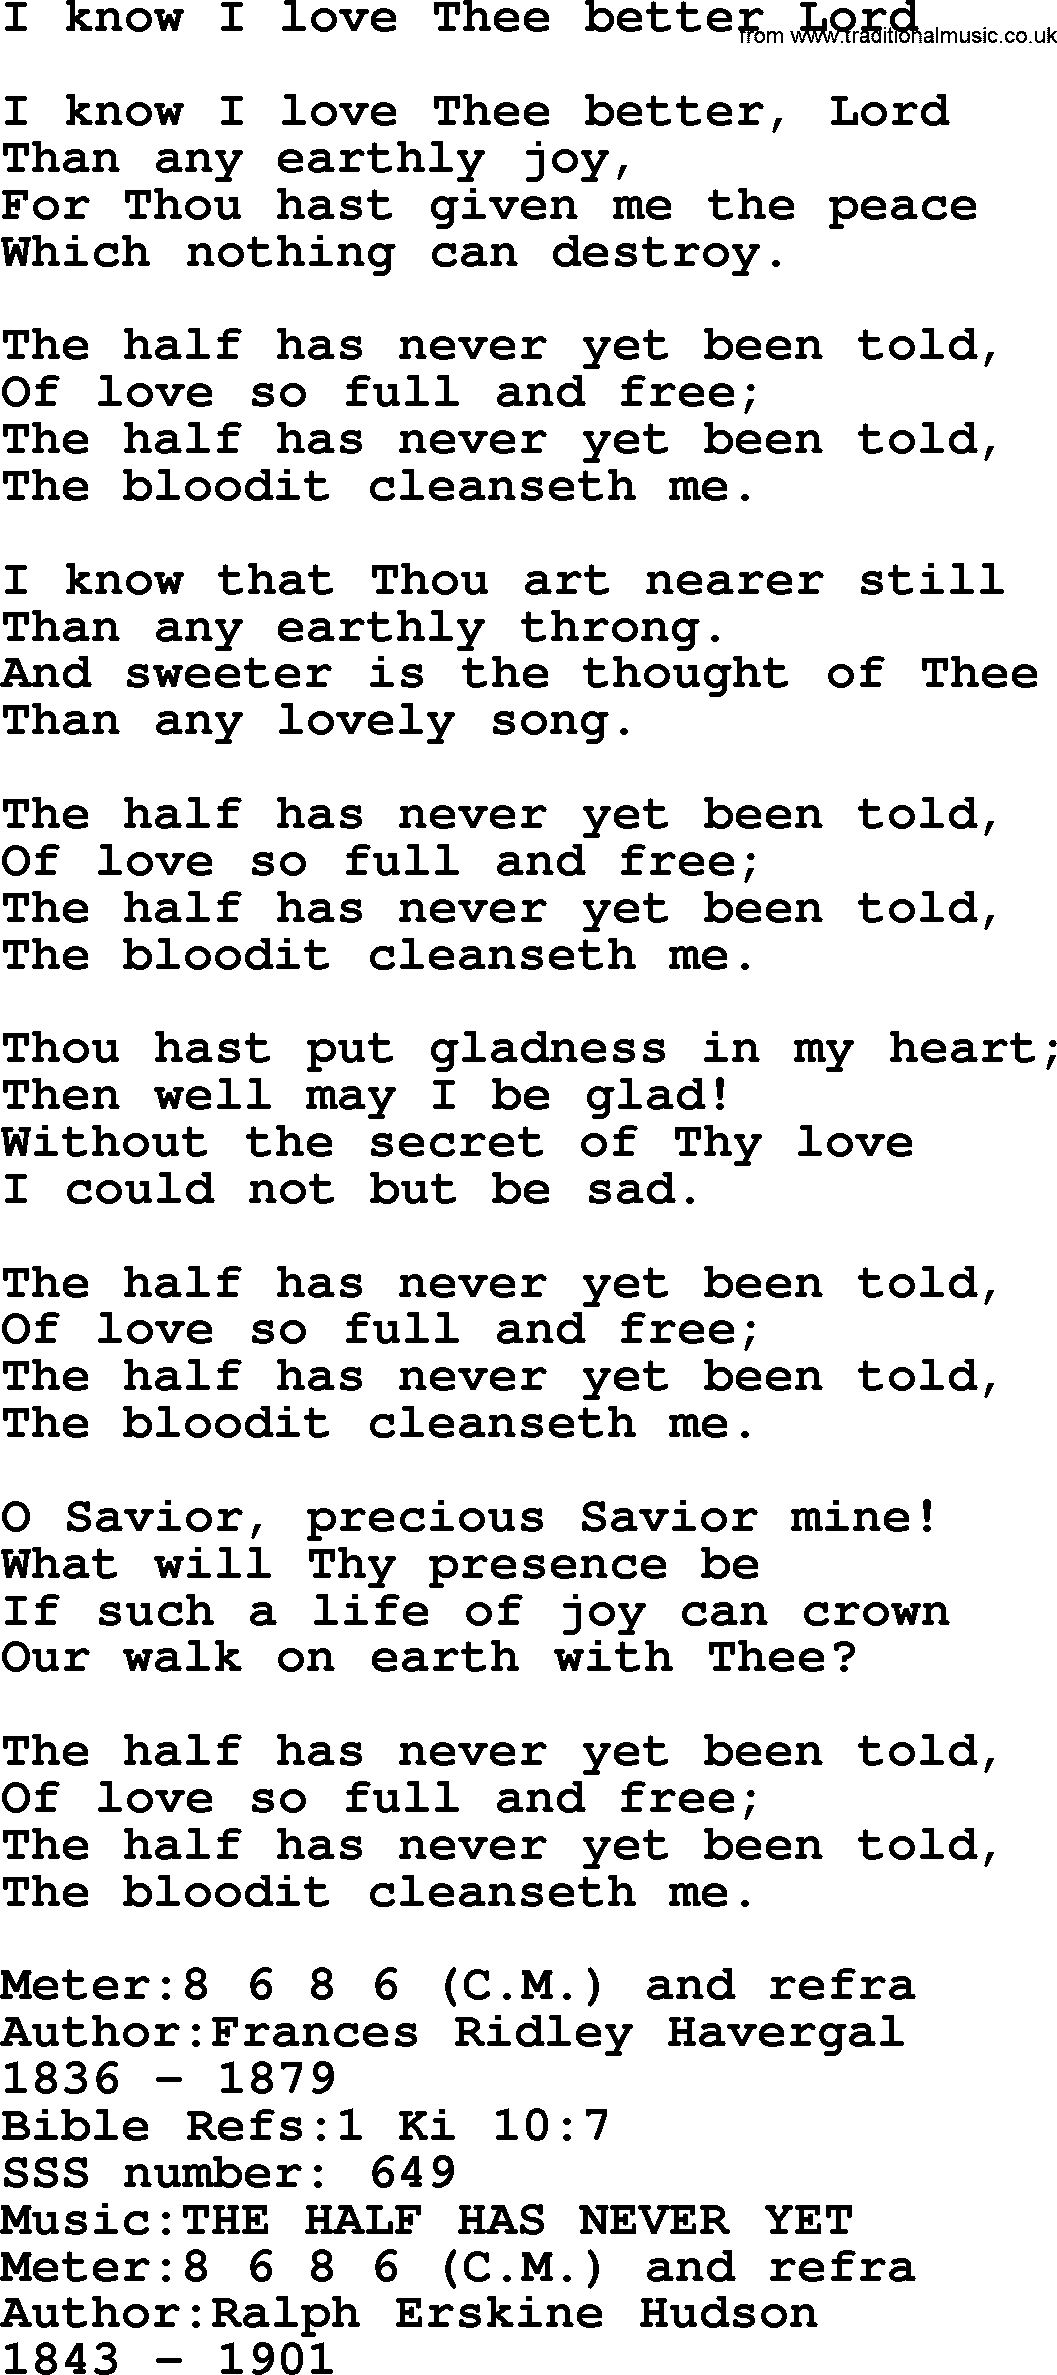 Sacred Songs and Solos complete, 1200 Hymns, title: I Know I Love Thee Better Lord, lyrics and PDF